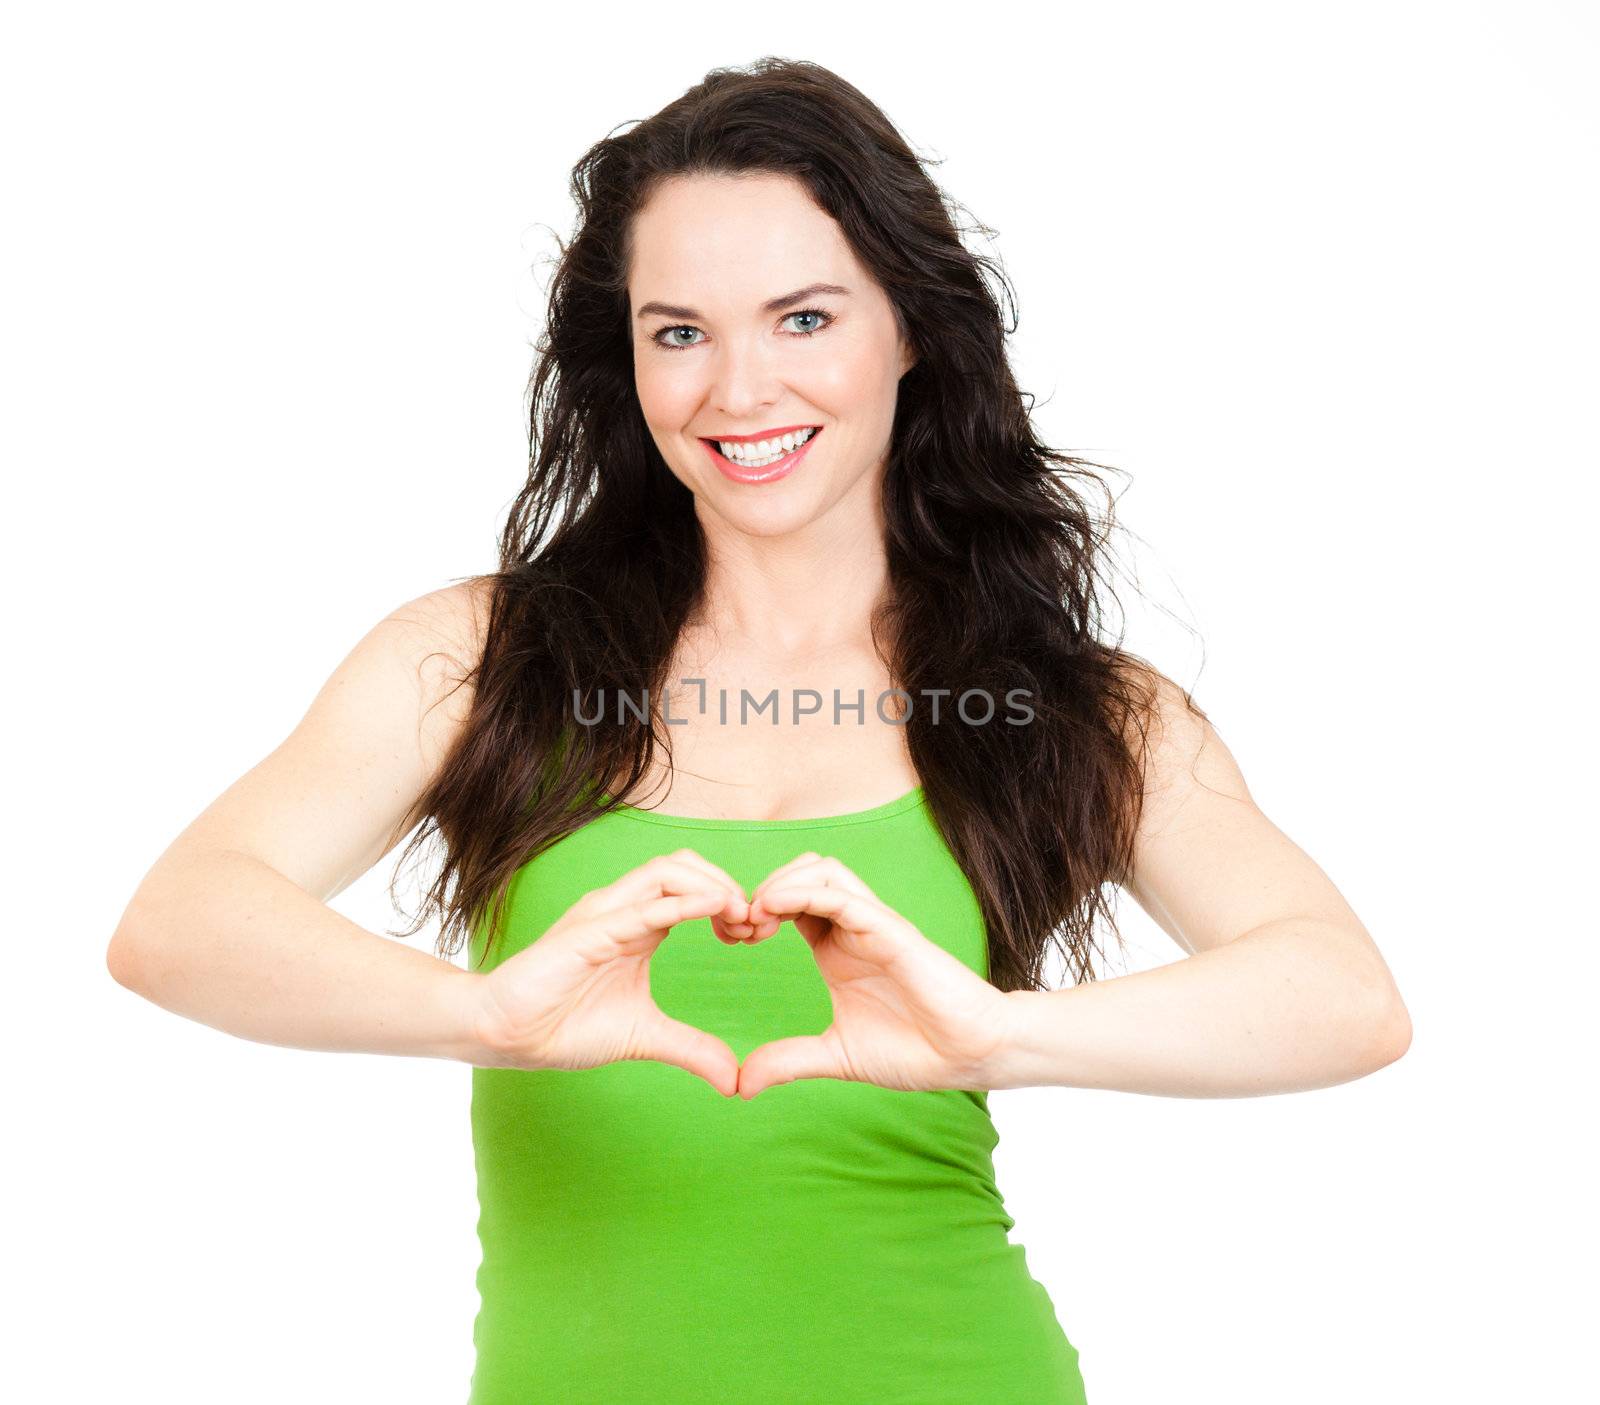 Beautiful smiling young woman symboling a love heart with hands. Isolated over white.